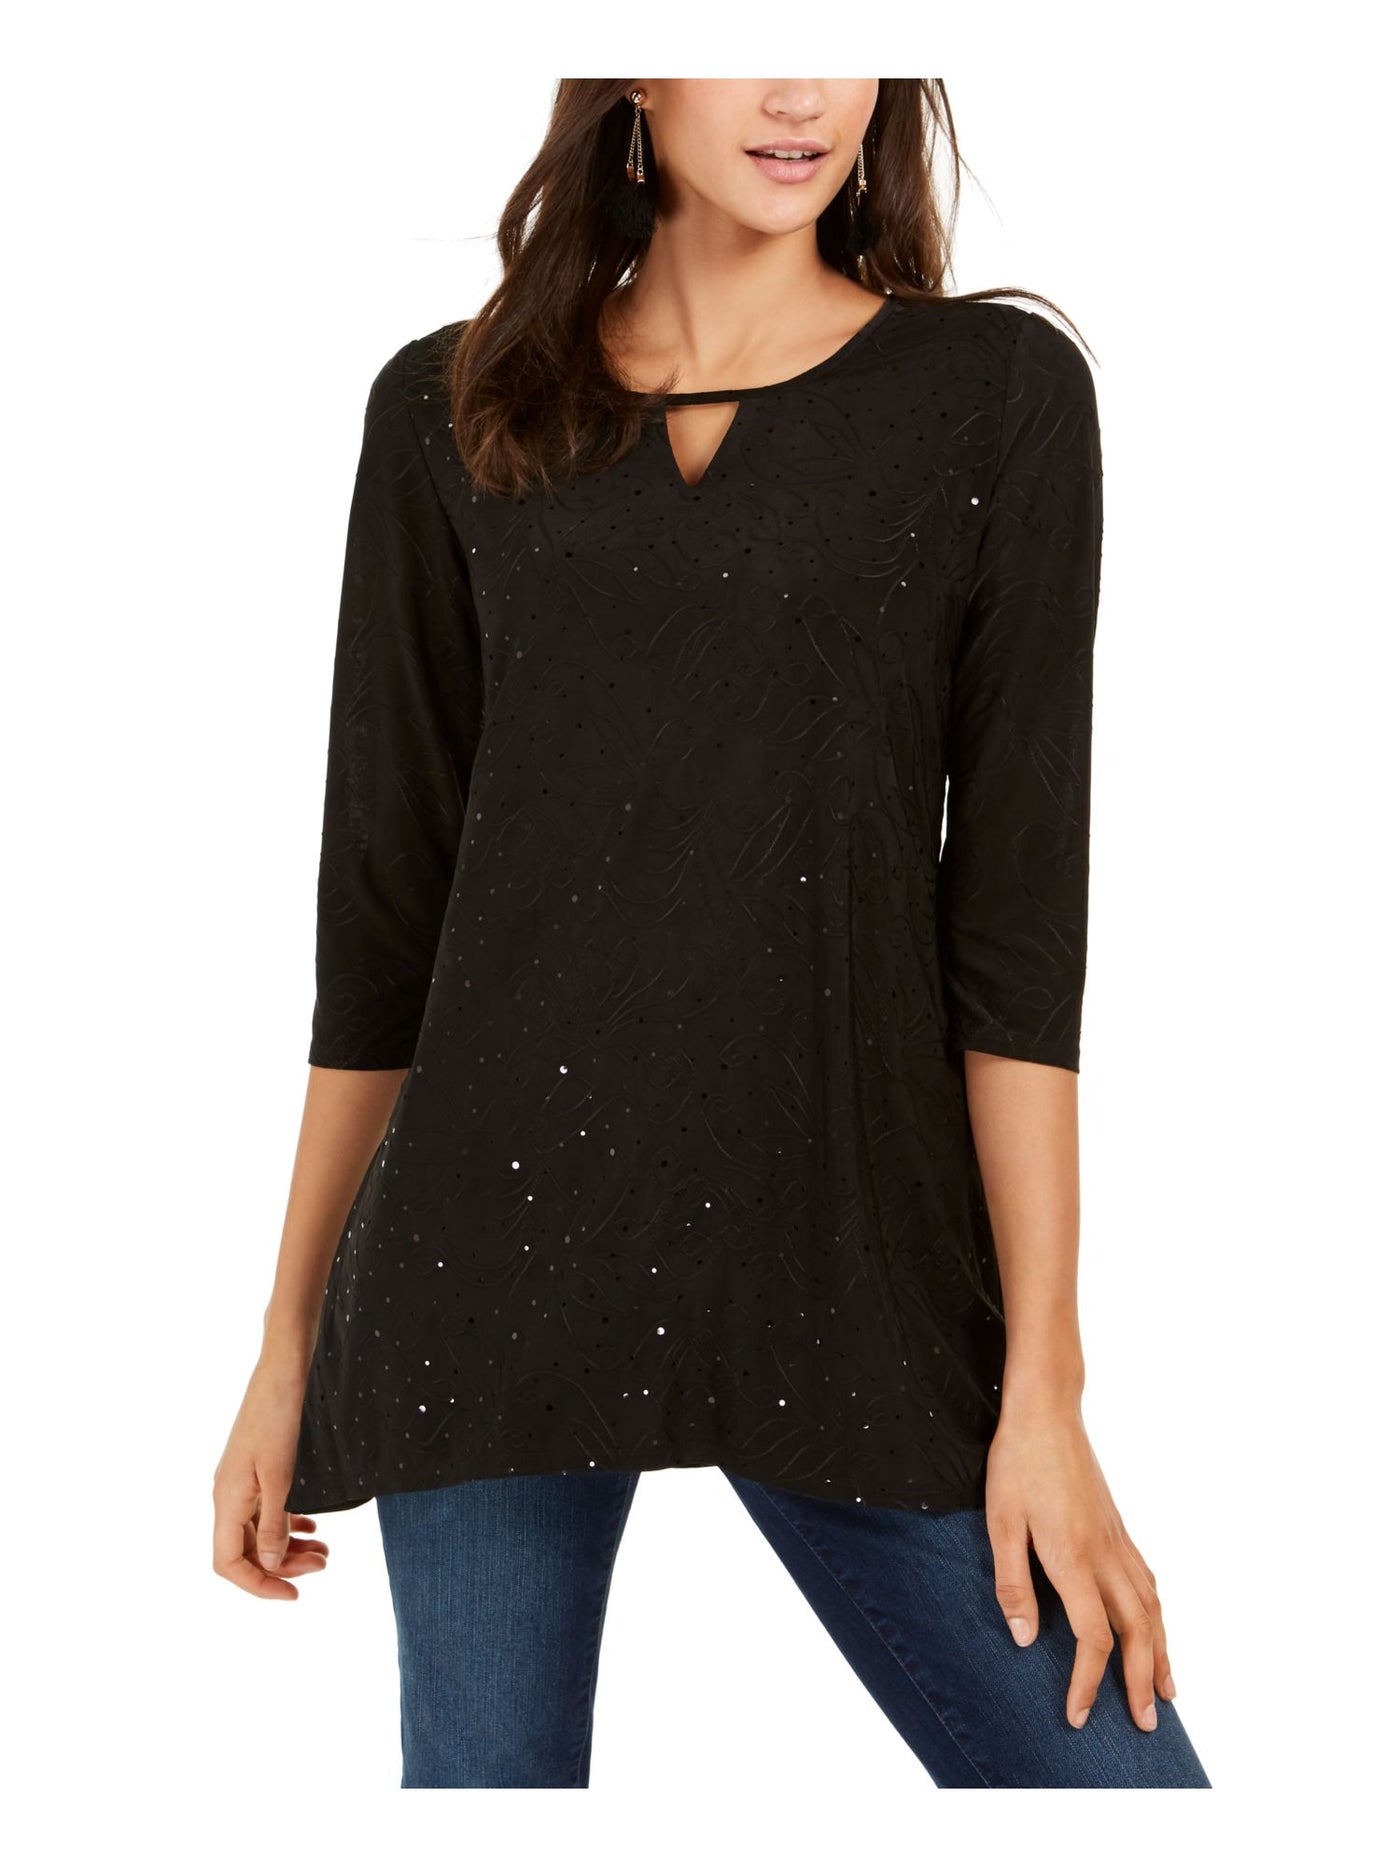 NY COLLECTION Womens Black Embroidered Sequined 3/4 Sleeve Keyhole Handkerchief Top Petites PS